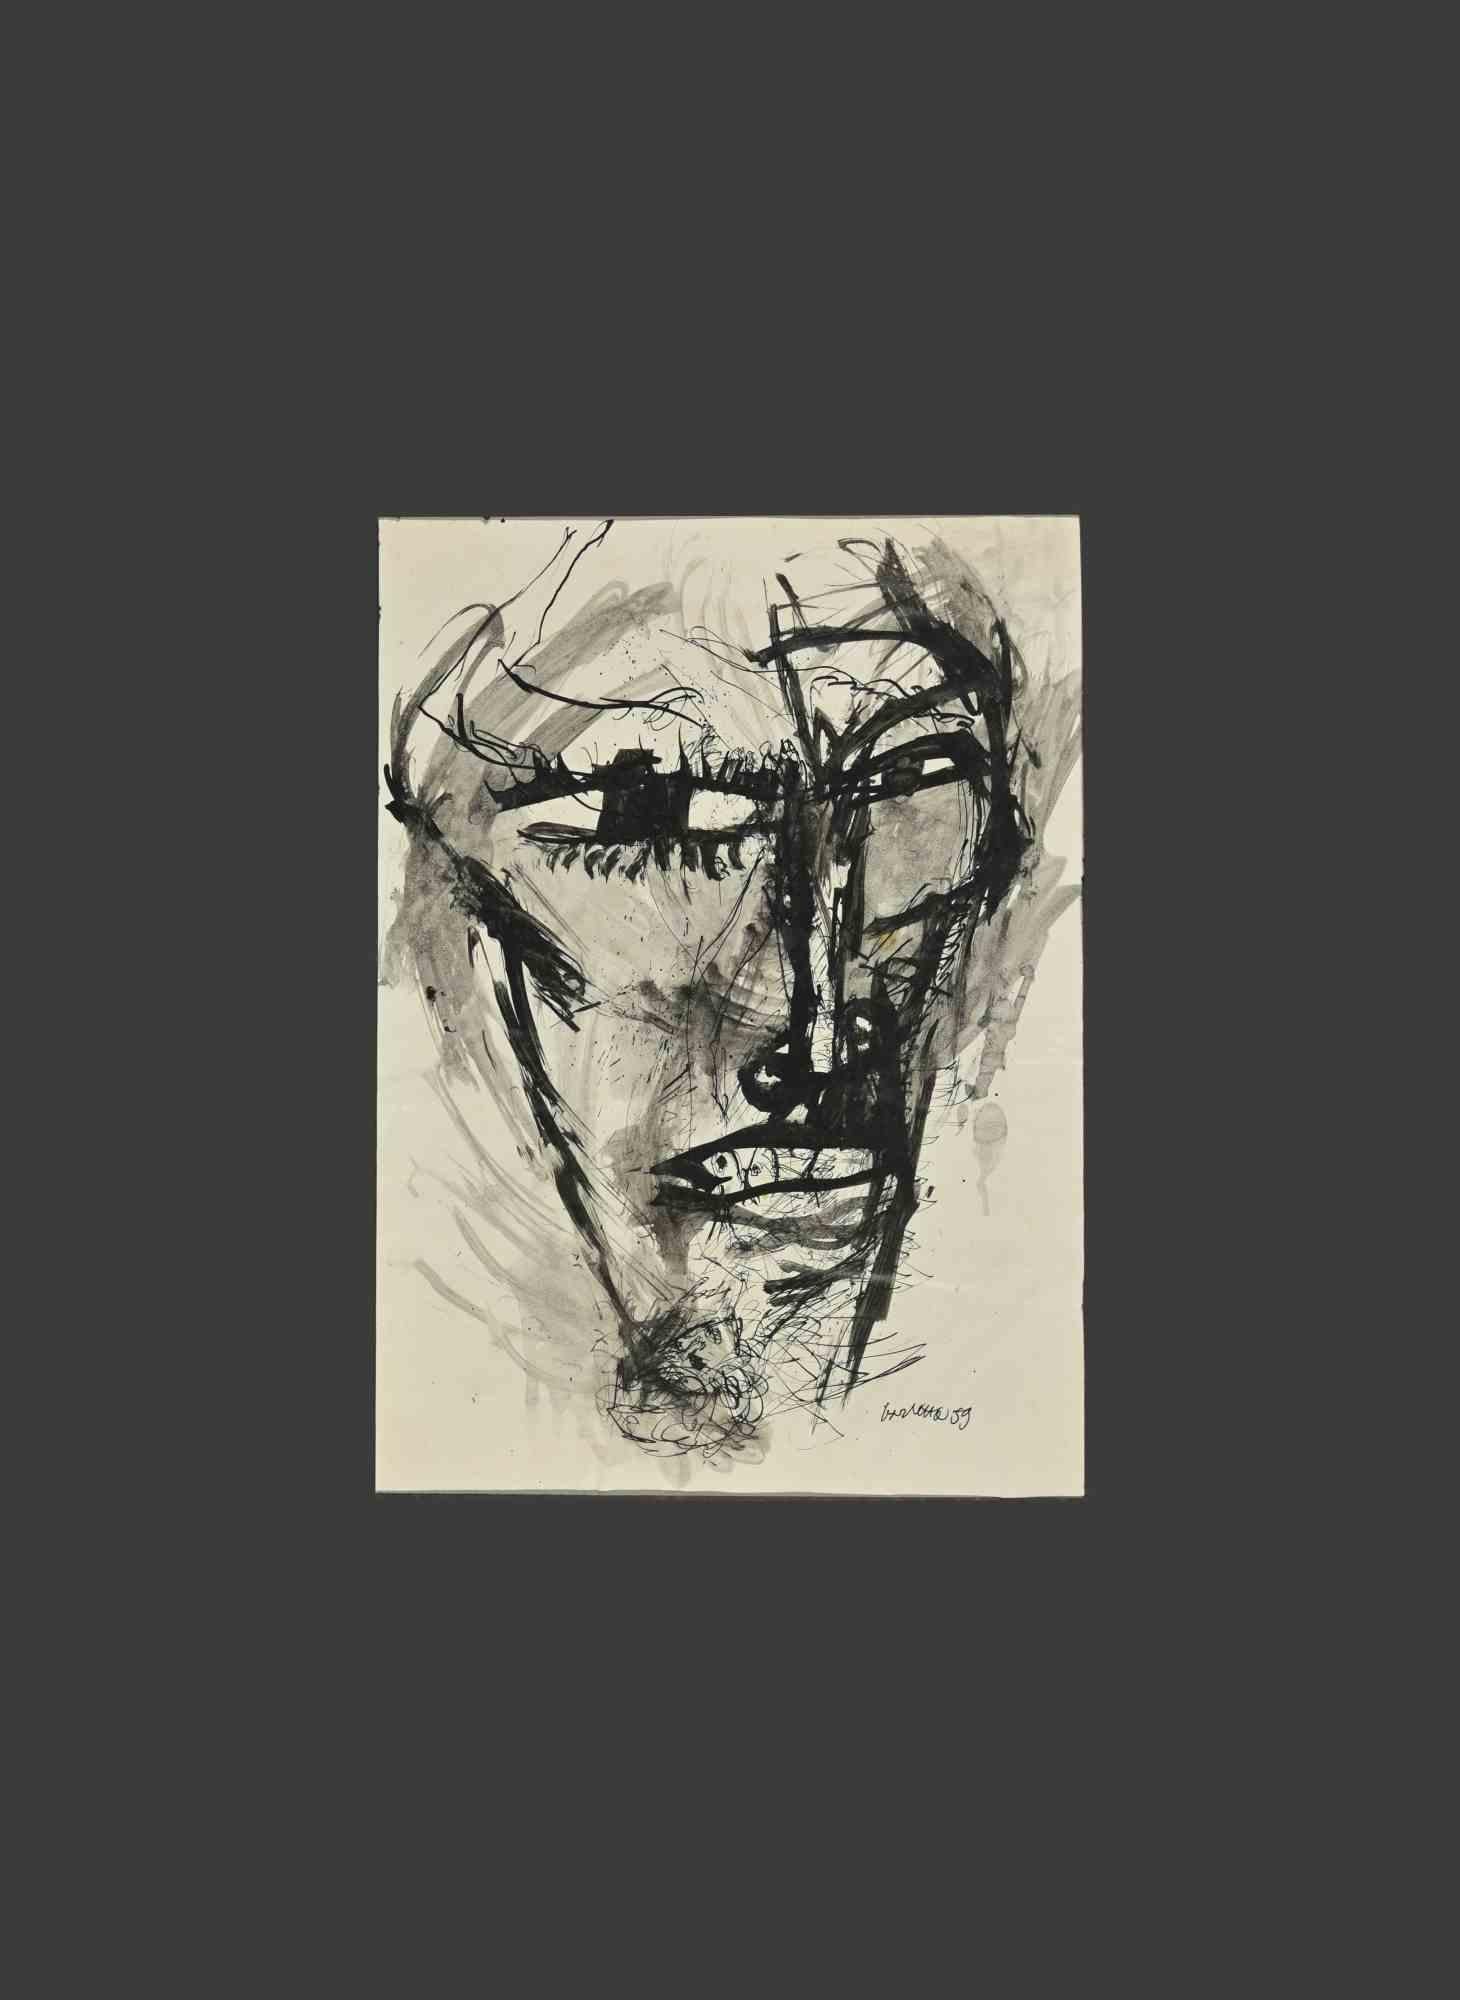 The Portrait is a China ink drawing artwork, realized by Sergio Barletta in 1951.

Hand-signed on the lower margin. 

Good conditions.

Included passport, 70 x 50 cm.

Sergio Barletta (1934) is  an Italian cartoonist and illustrator, who has also